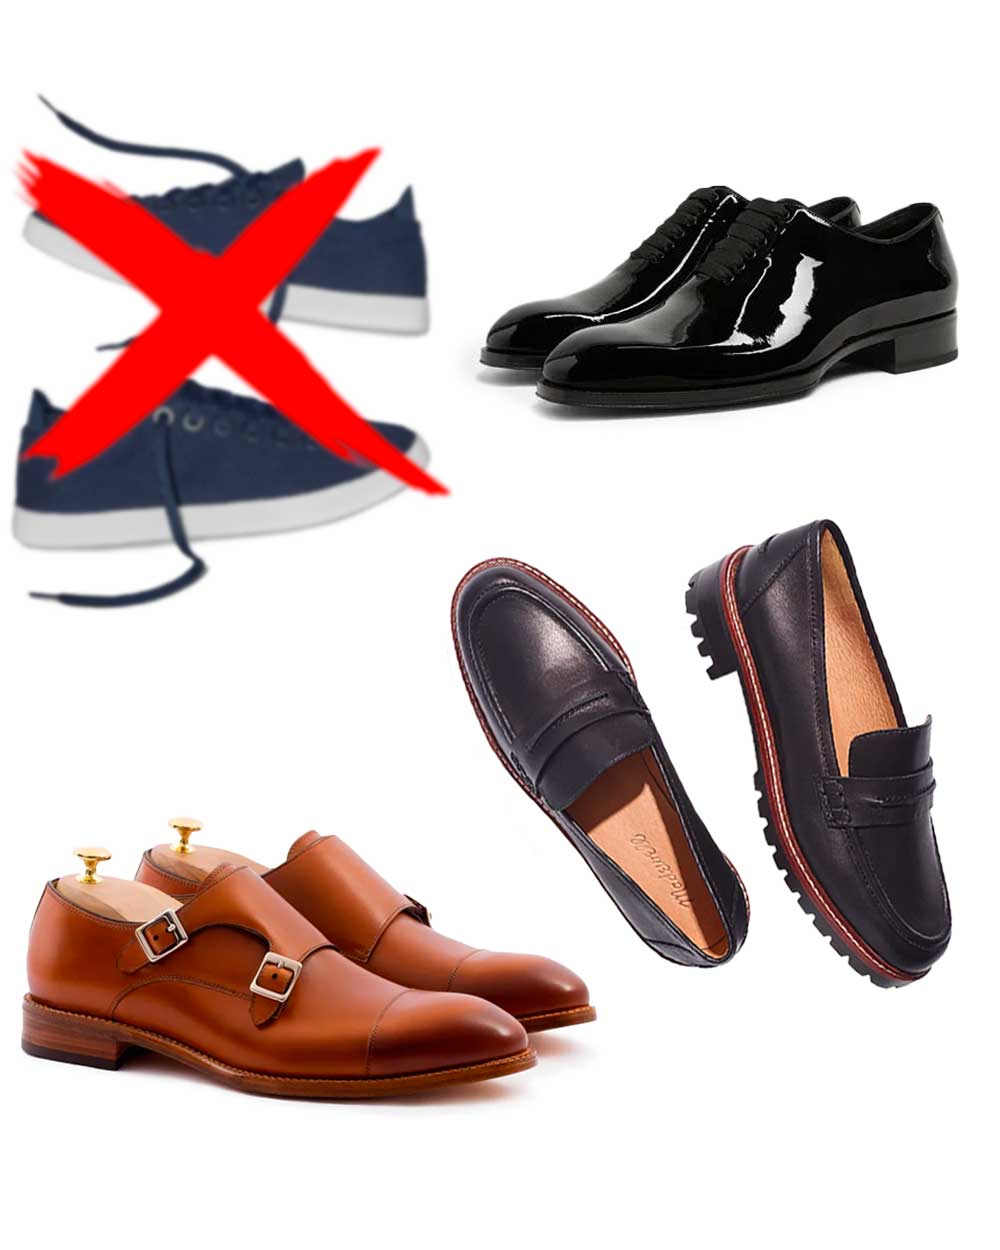 Cocktail Shoes for Men what to wear and not to wear